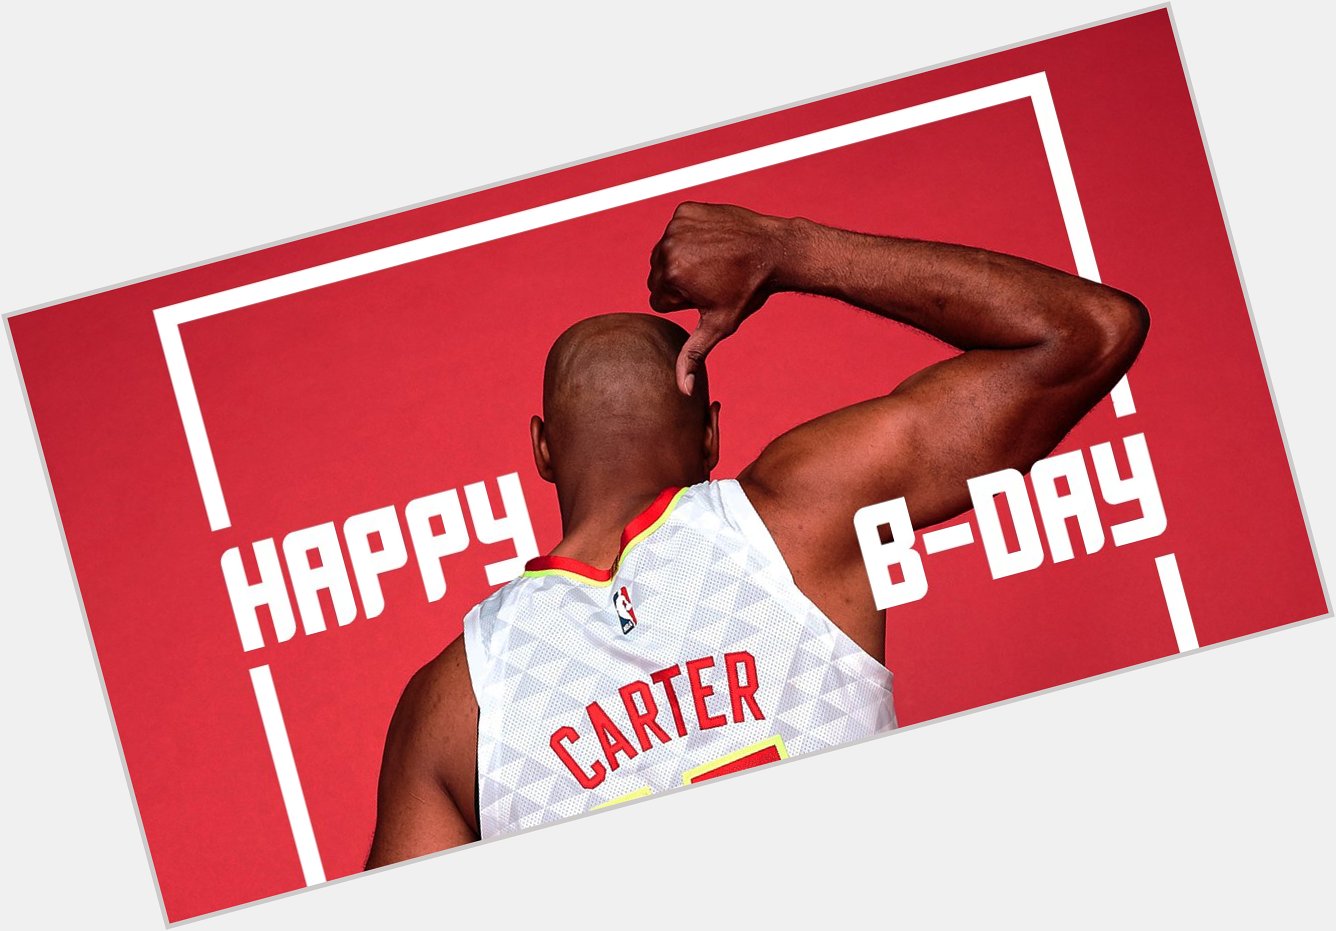 To join us in wishing happy birthday to half-man, half-amazing, Vince Carter! x 